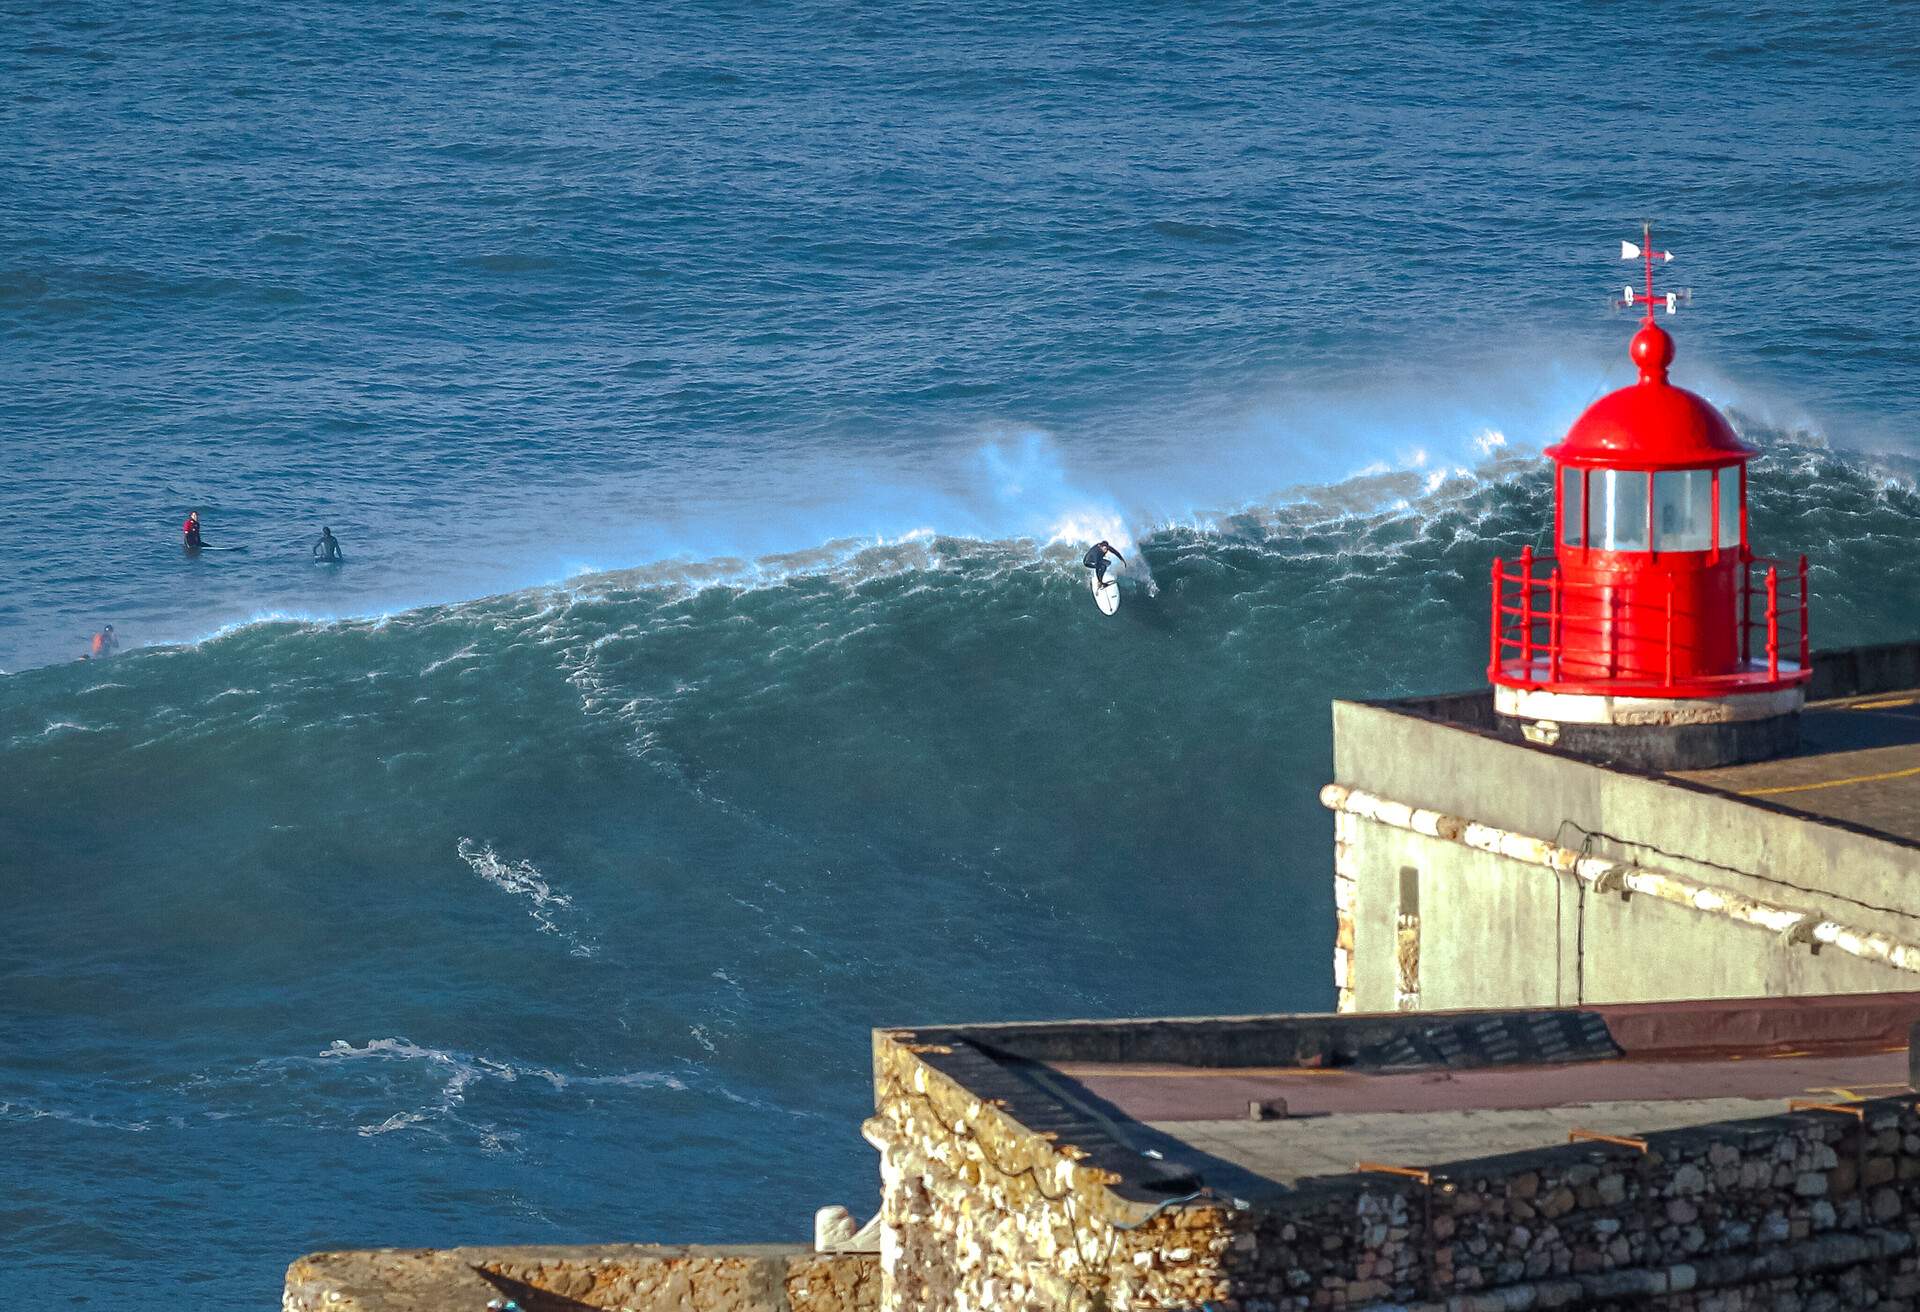 Surfers practice the sport near the lighthouse of Nazaré, Portugal, with one of the biggest waves in the world and also one of the most dangerous.